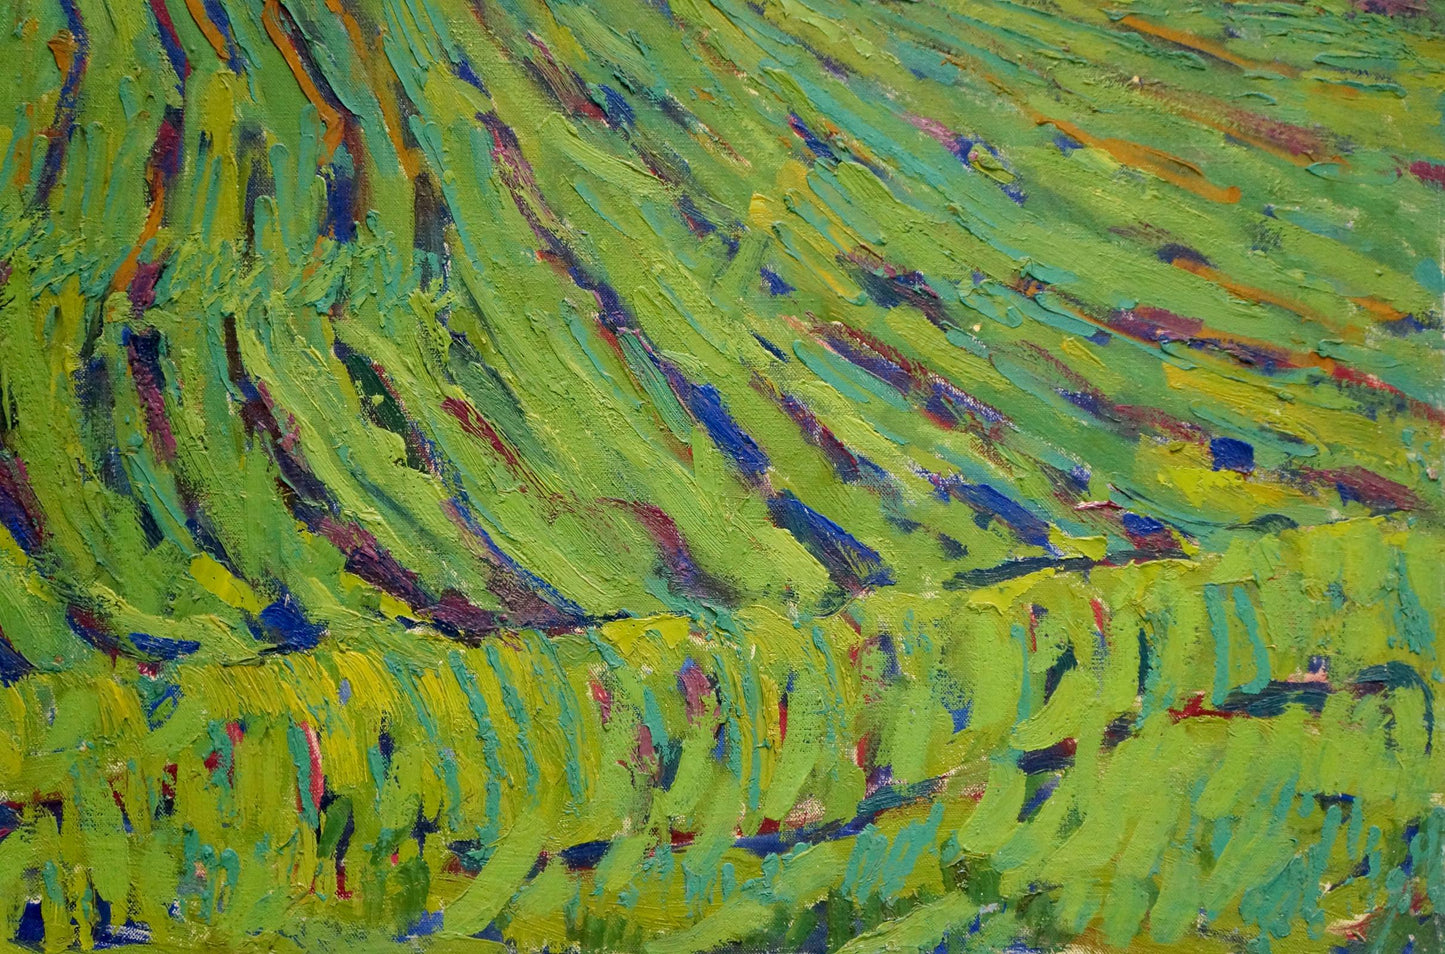 Fields portrayed in an oil painting by Dmitry Andreevich Chvala